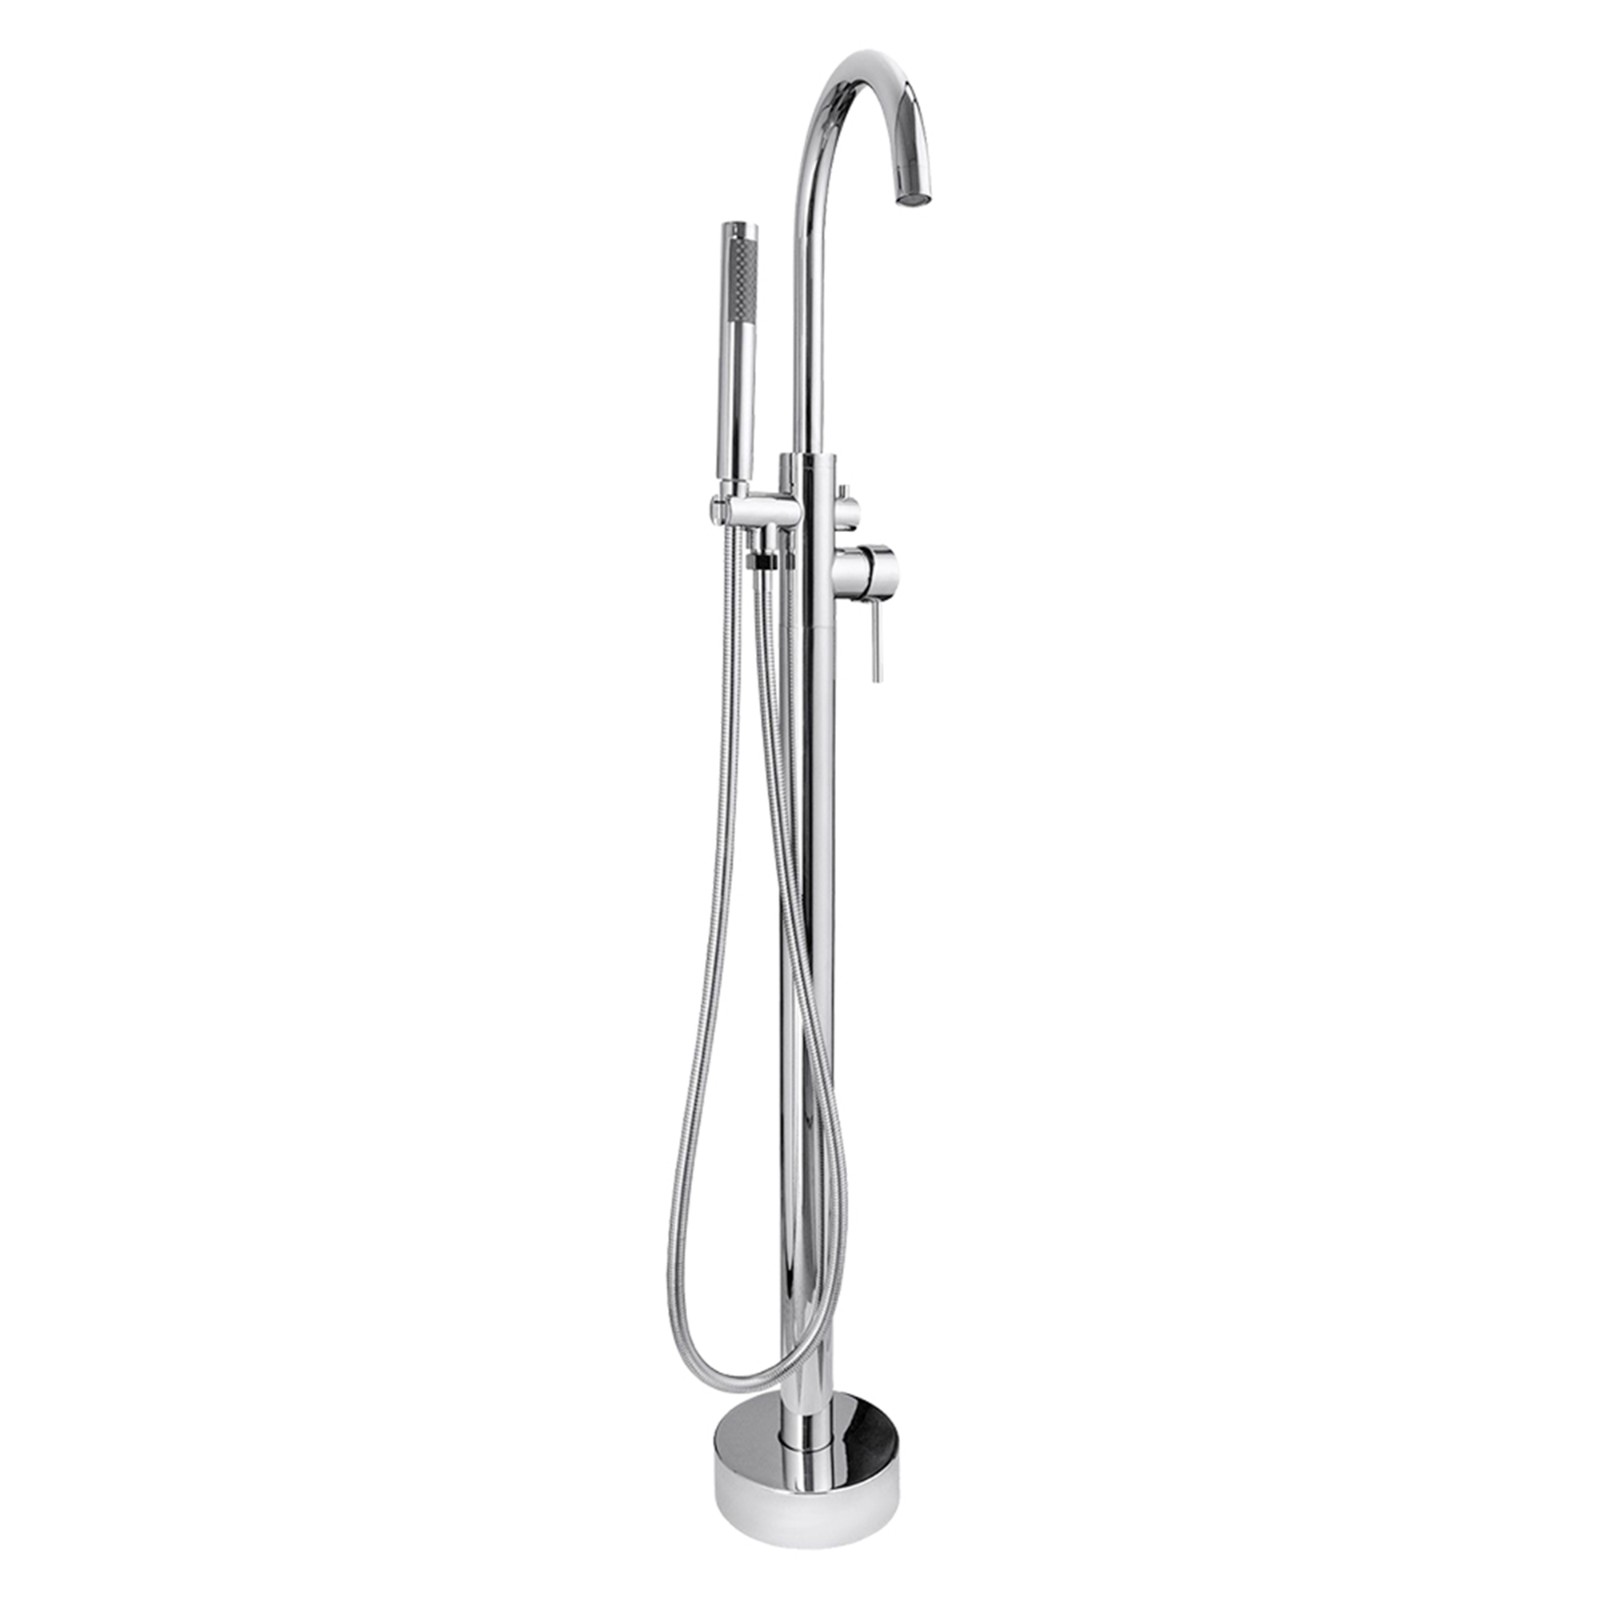  WOODBRIDGE F0002CHRD Contemporary Single Handle Floor Mount Freestanding Tub Filler Faucet with Hand shower in Chrome Finish._10682